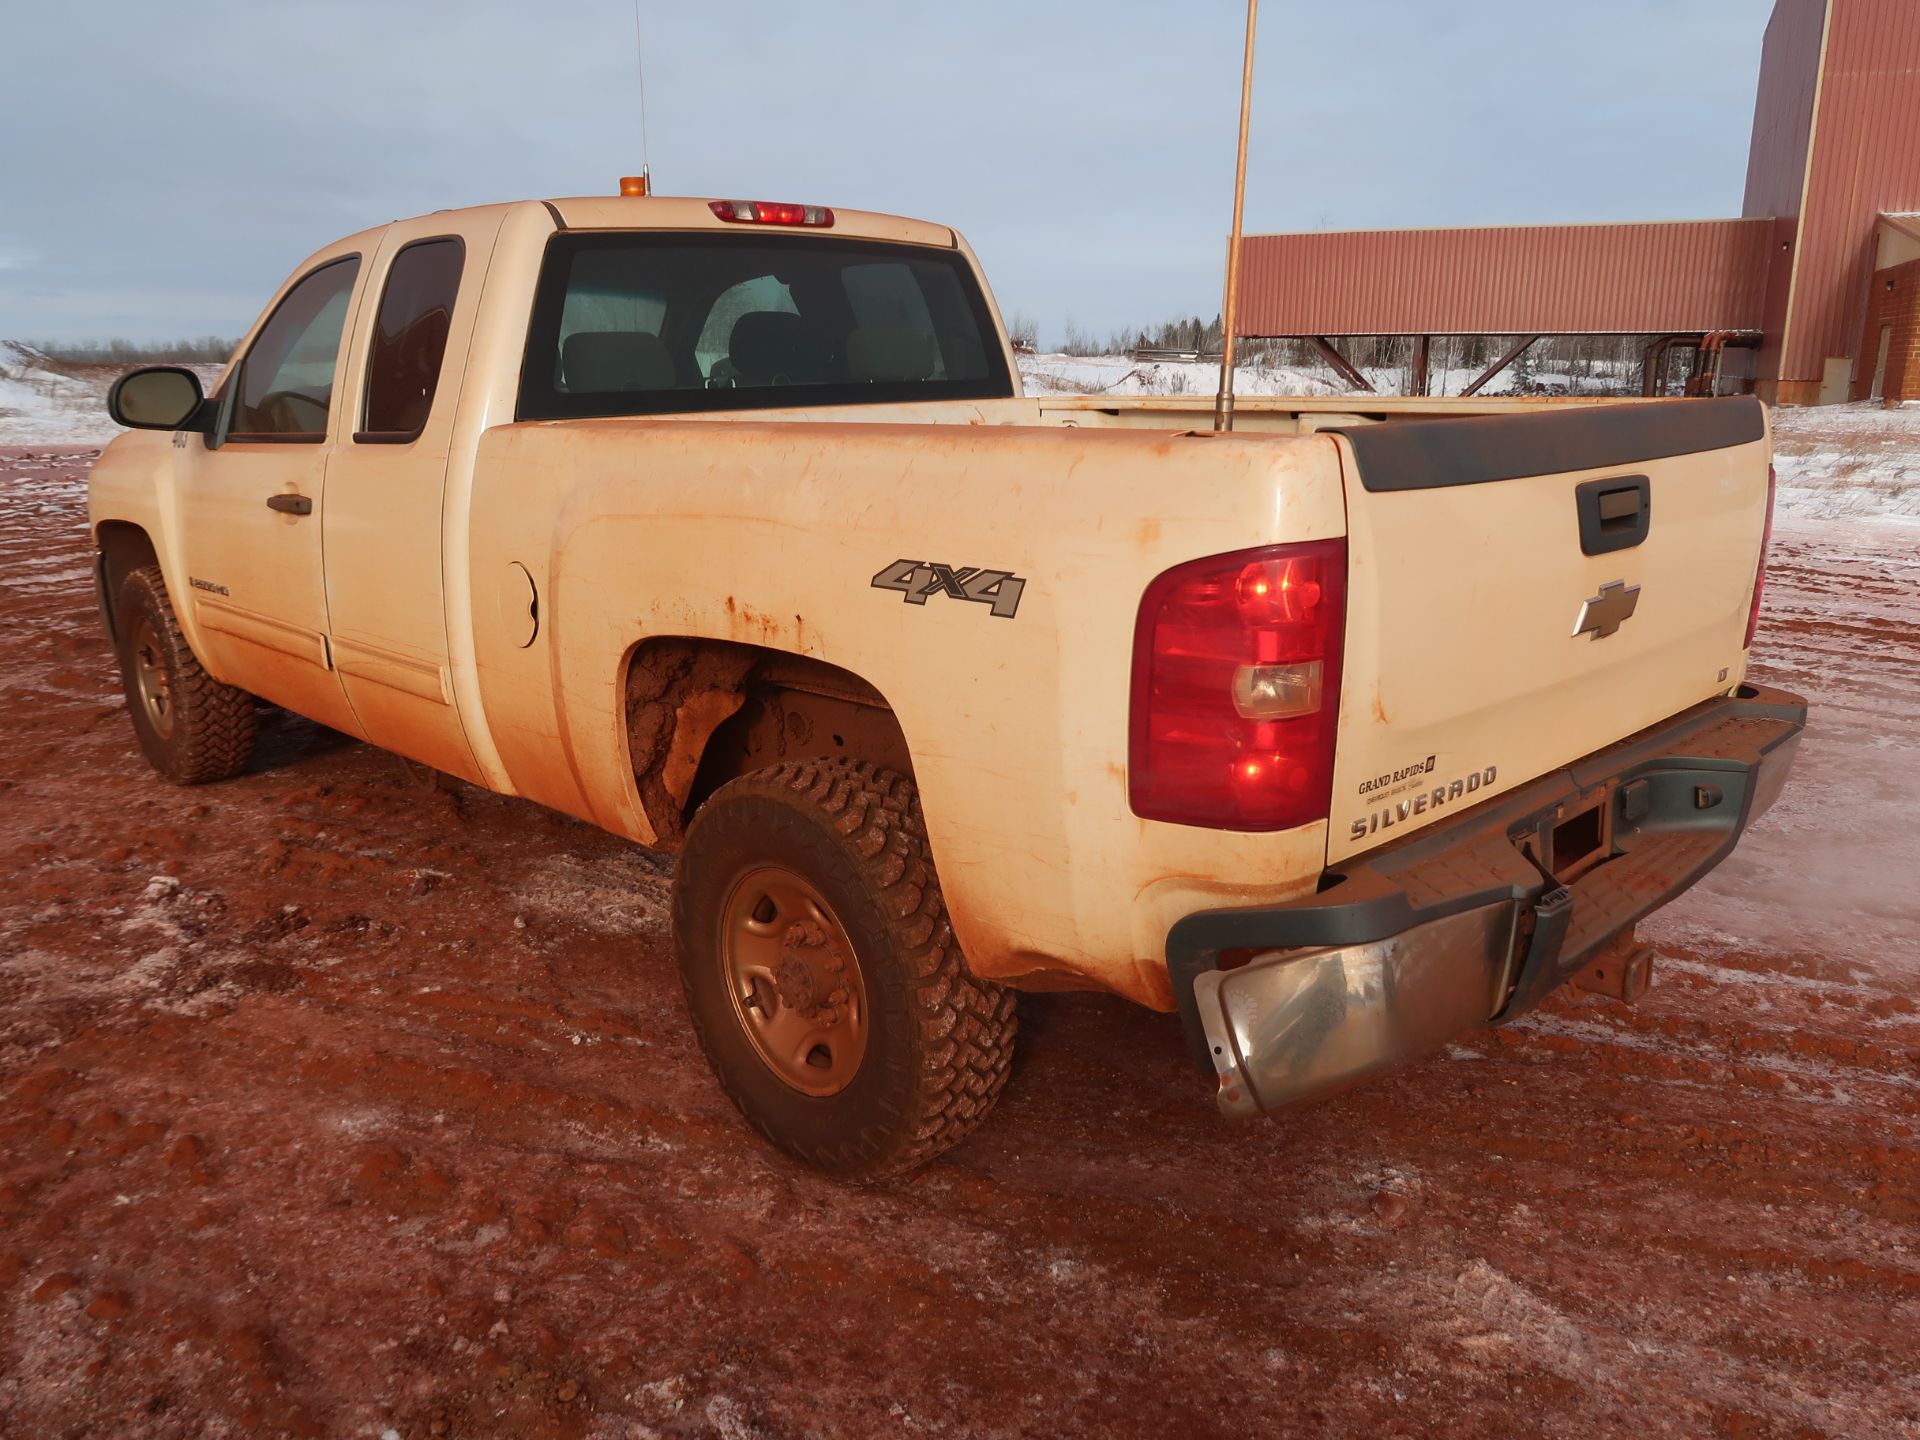 2009 Chevy 4x4 pickup truck, model 2500HD - Image 3 of 3